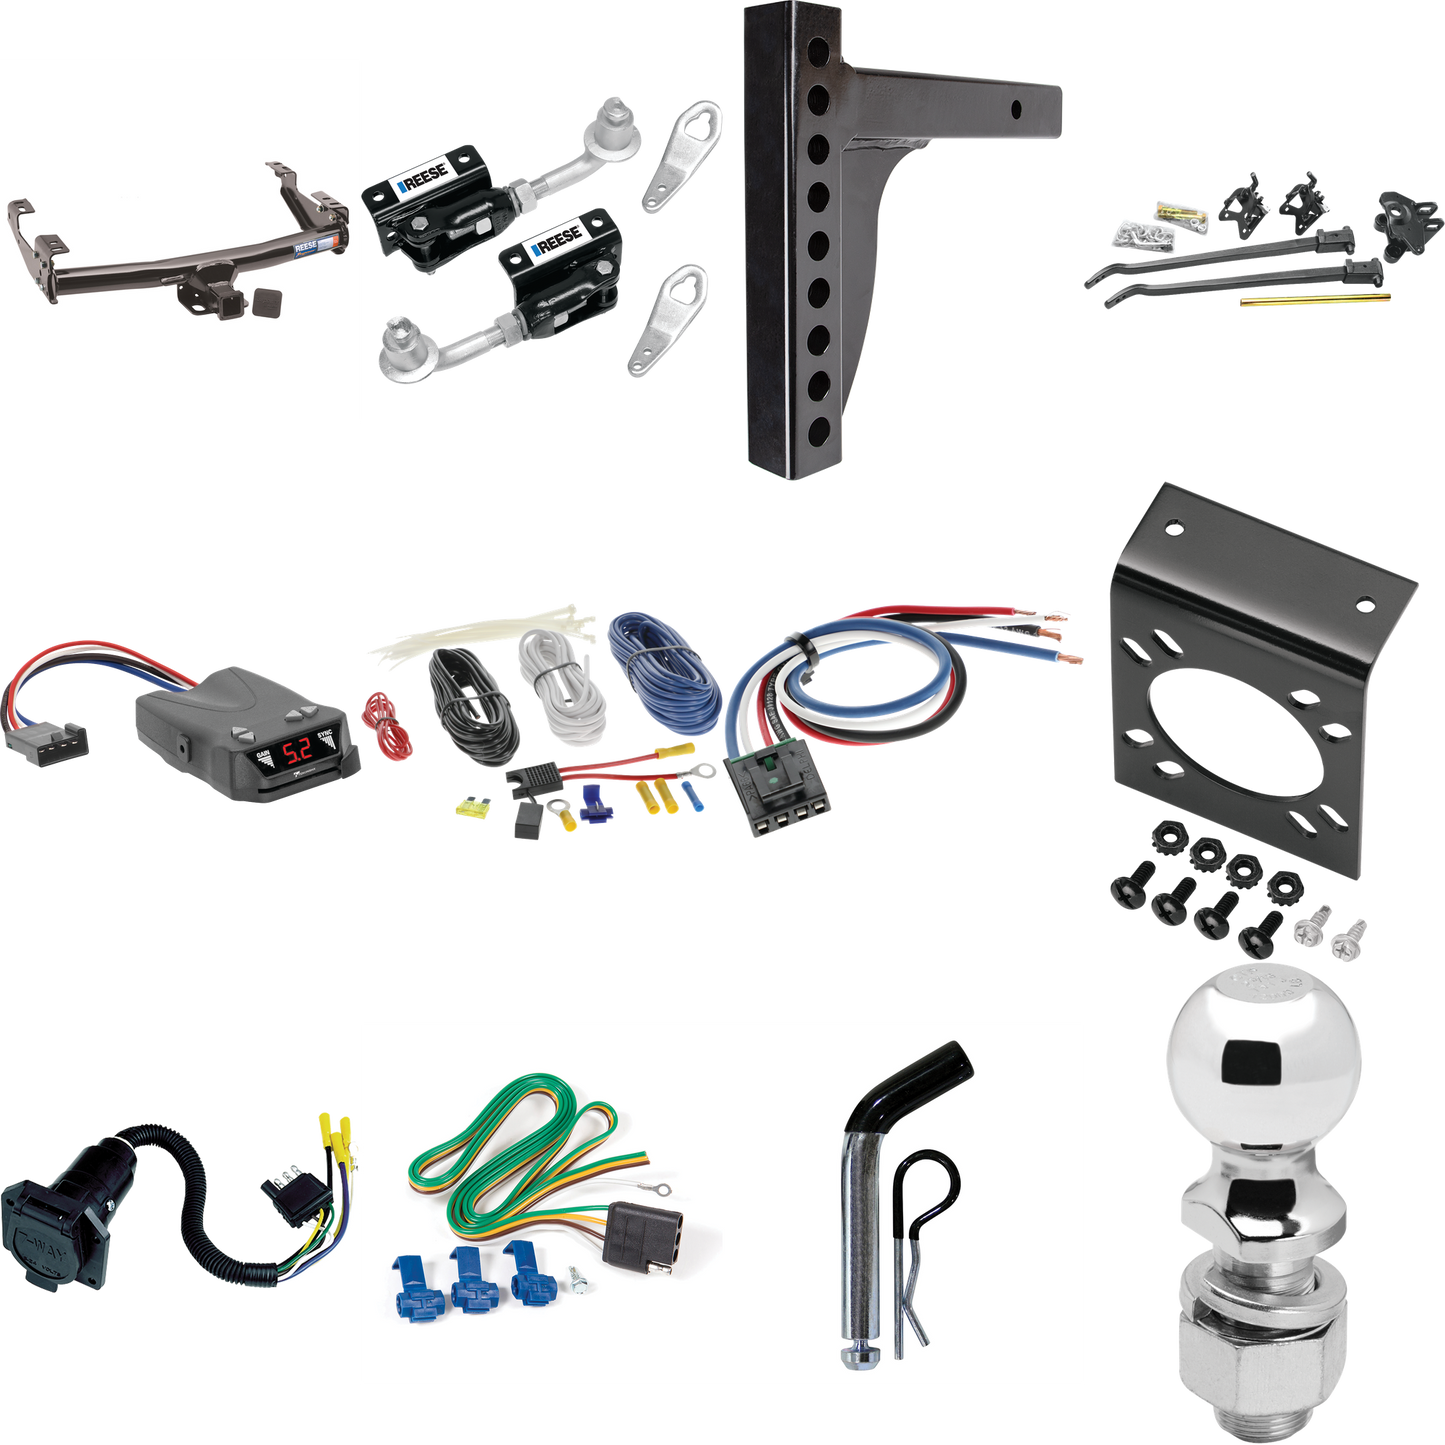 Fits 1971-1993 Dodge D250 Trailer Hitch Tow PKG w/ 12K Trunnion Bar Weight Distribution Hitch + Pin/Clip + Dual Cam Sway Control + 2-5/16" Ball + Tekonsha Brakeman IV Brake Control + Generic BC Wiring Adapter + 7-Way RV Wiring By Reese Towpower